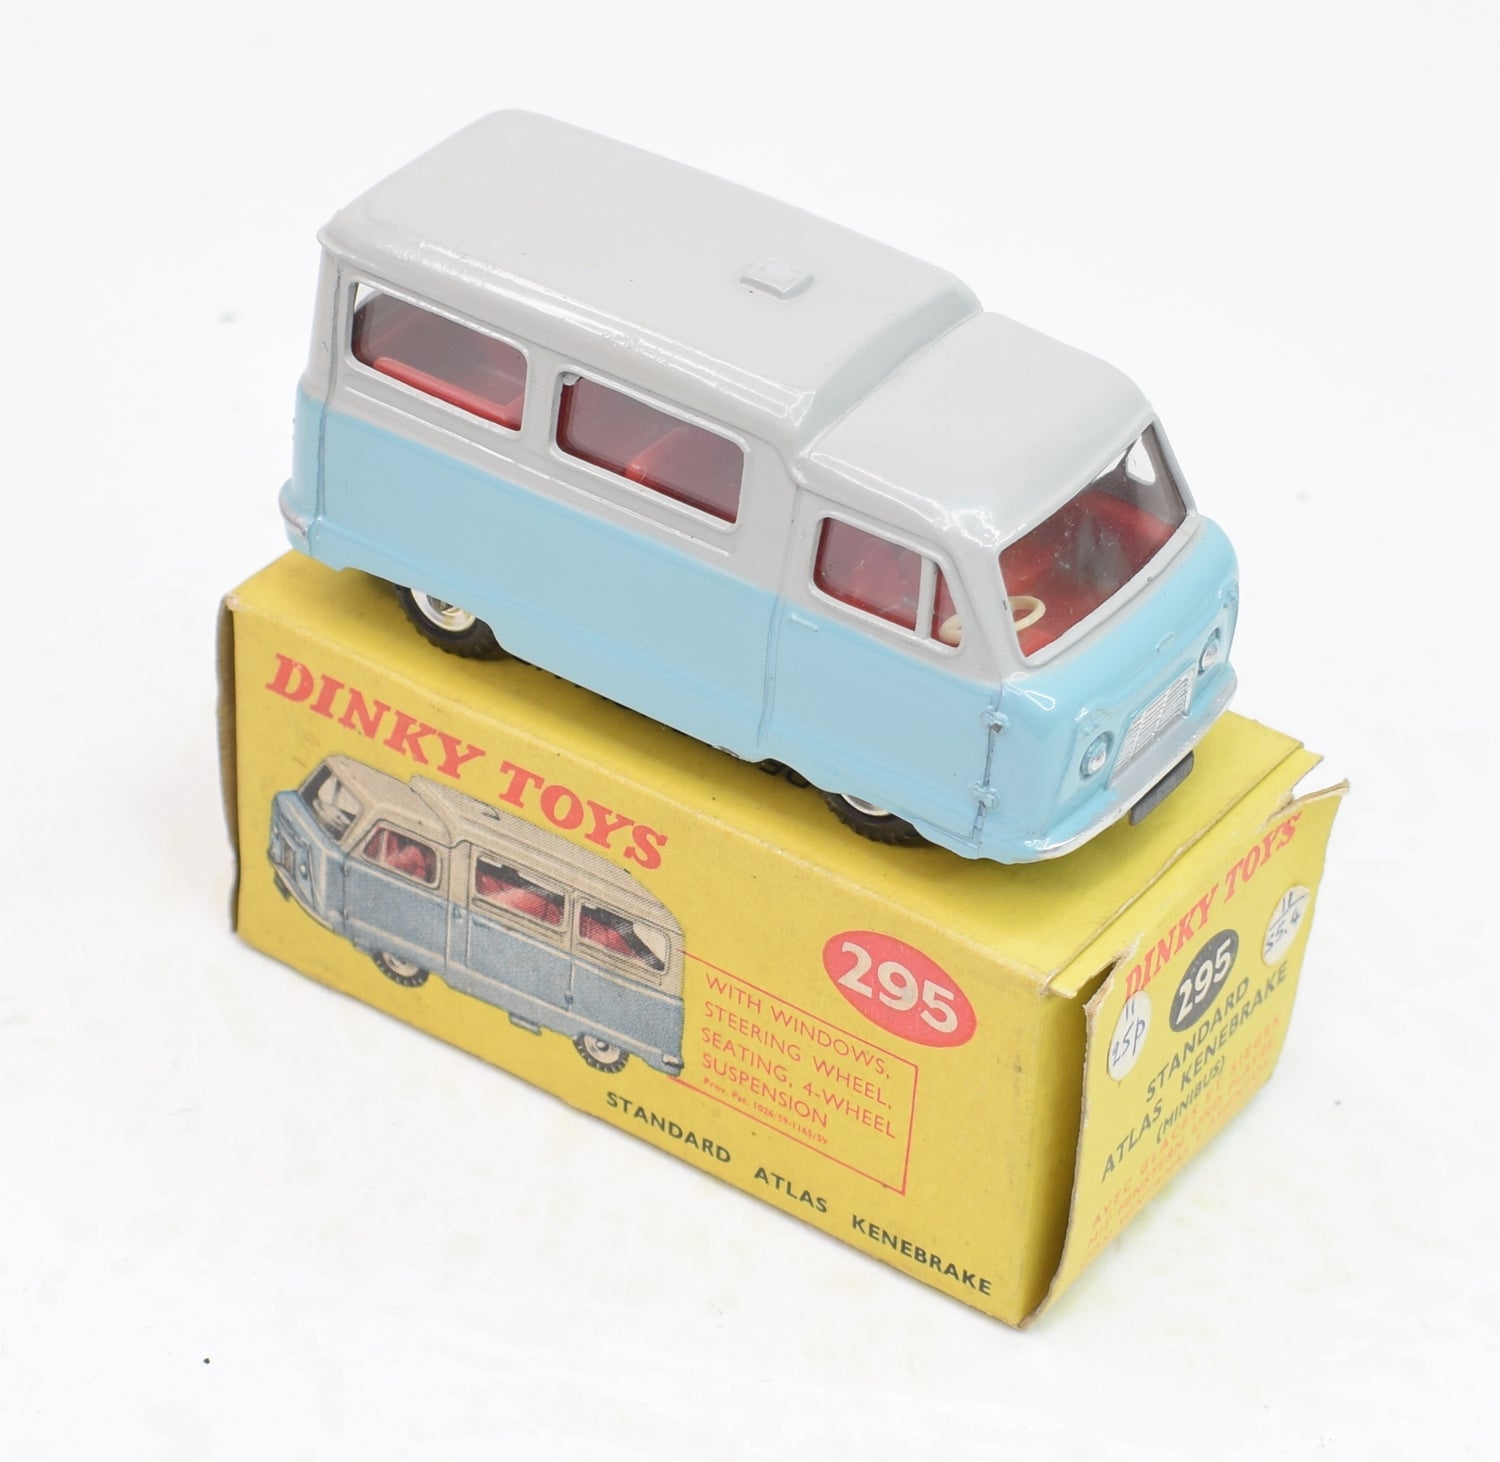 Dinky toys 295 Atlas Kenebrake Very Near Mint/Boxed 'Brecon' Collection Part 2